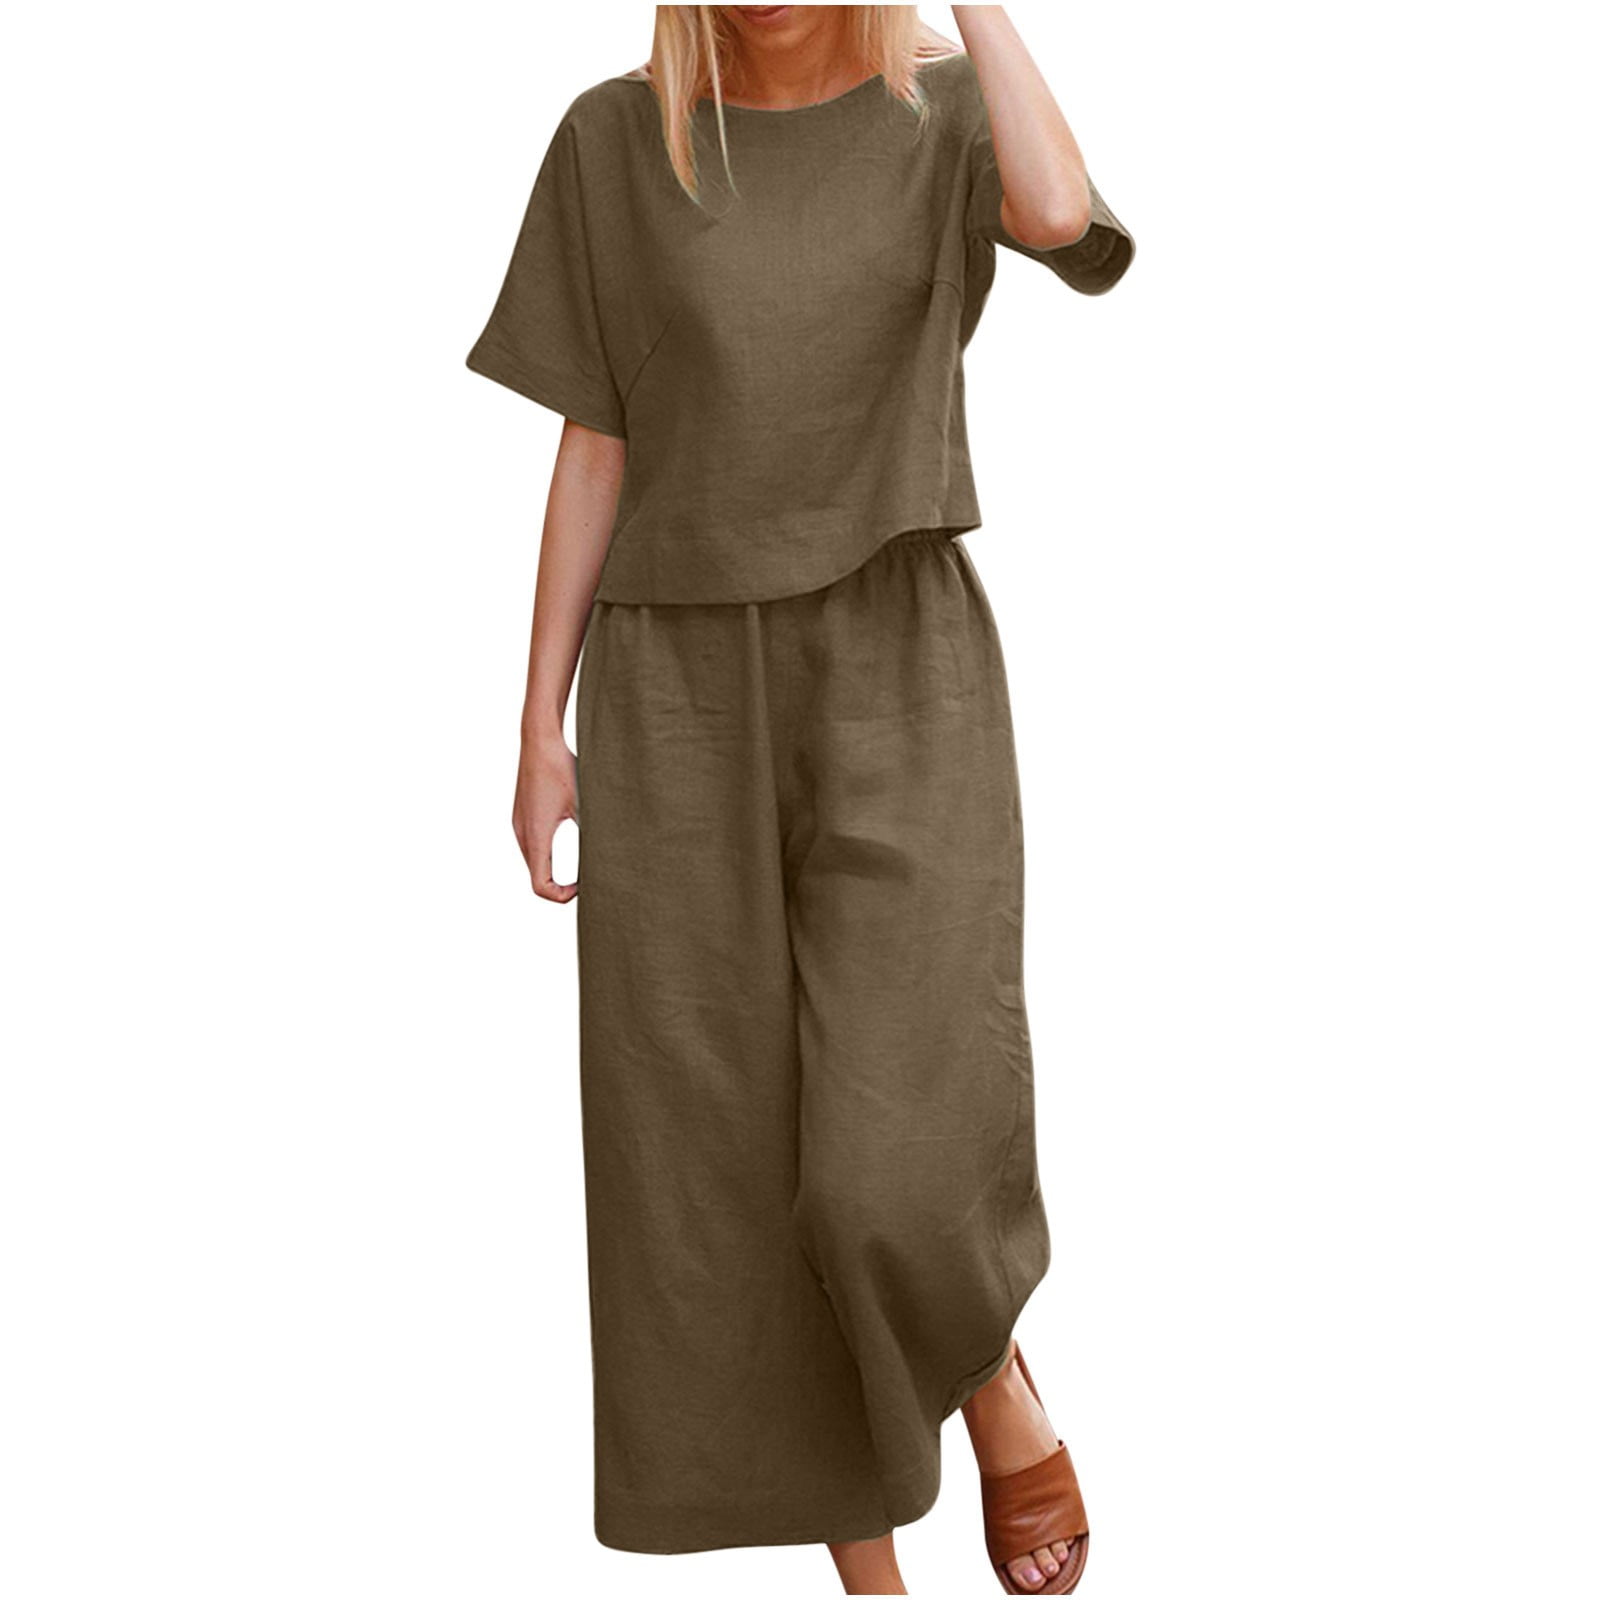 Two Piece Outfits for Women Cotton Linen Tops with Wide Leg Pants ...